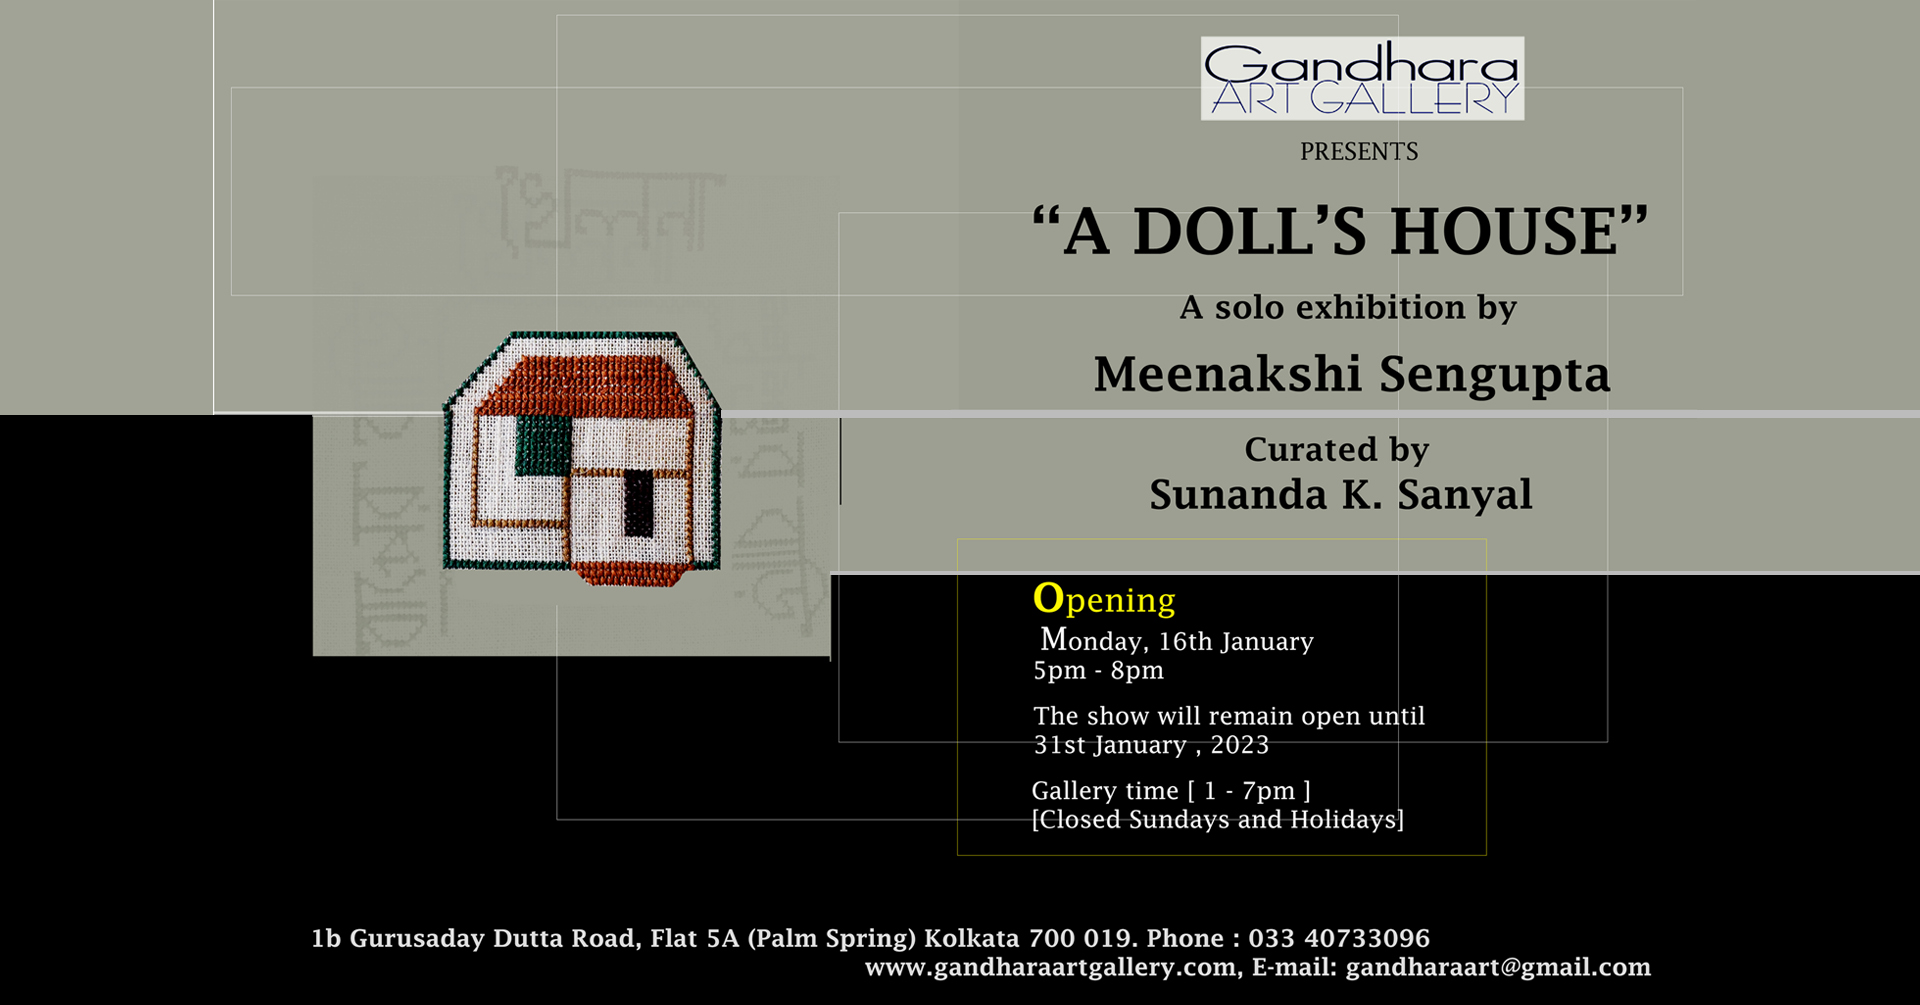 A DOLL S HOUSE A SOLO EXHIBITION OF MEENAKSHI SENGUPTA 16TH JANUARY TO 31ST JANUARY 2023